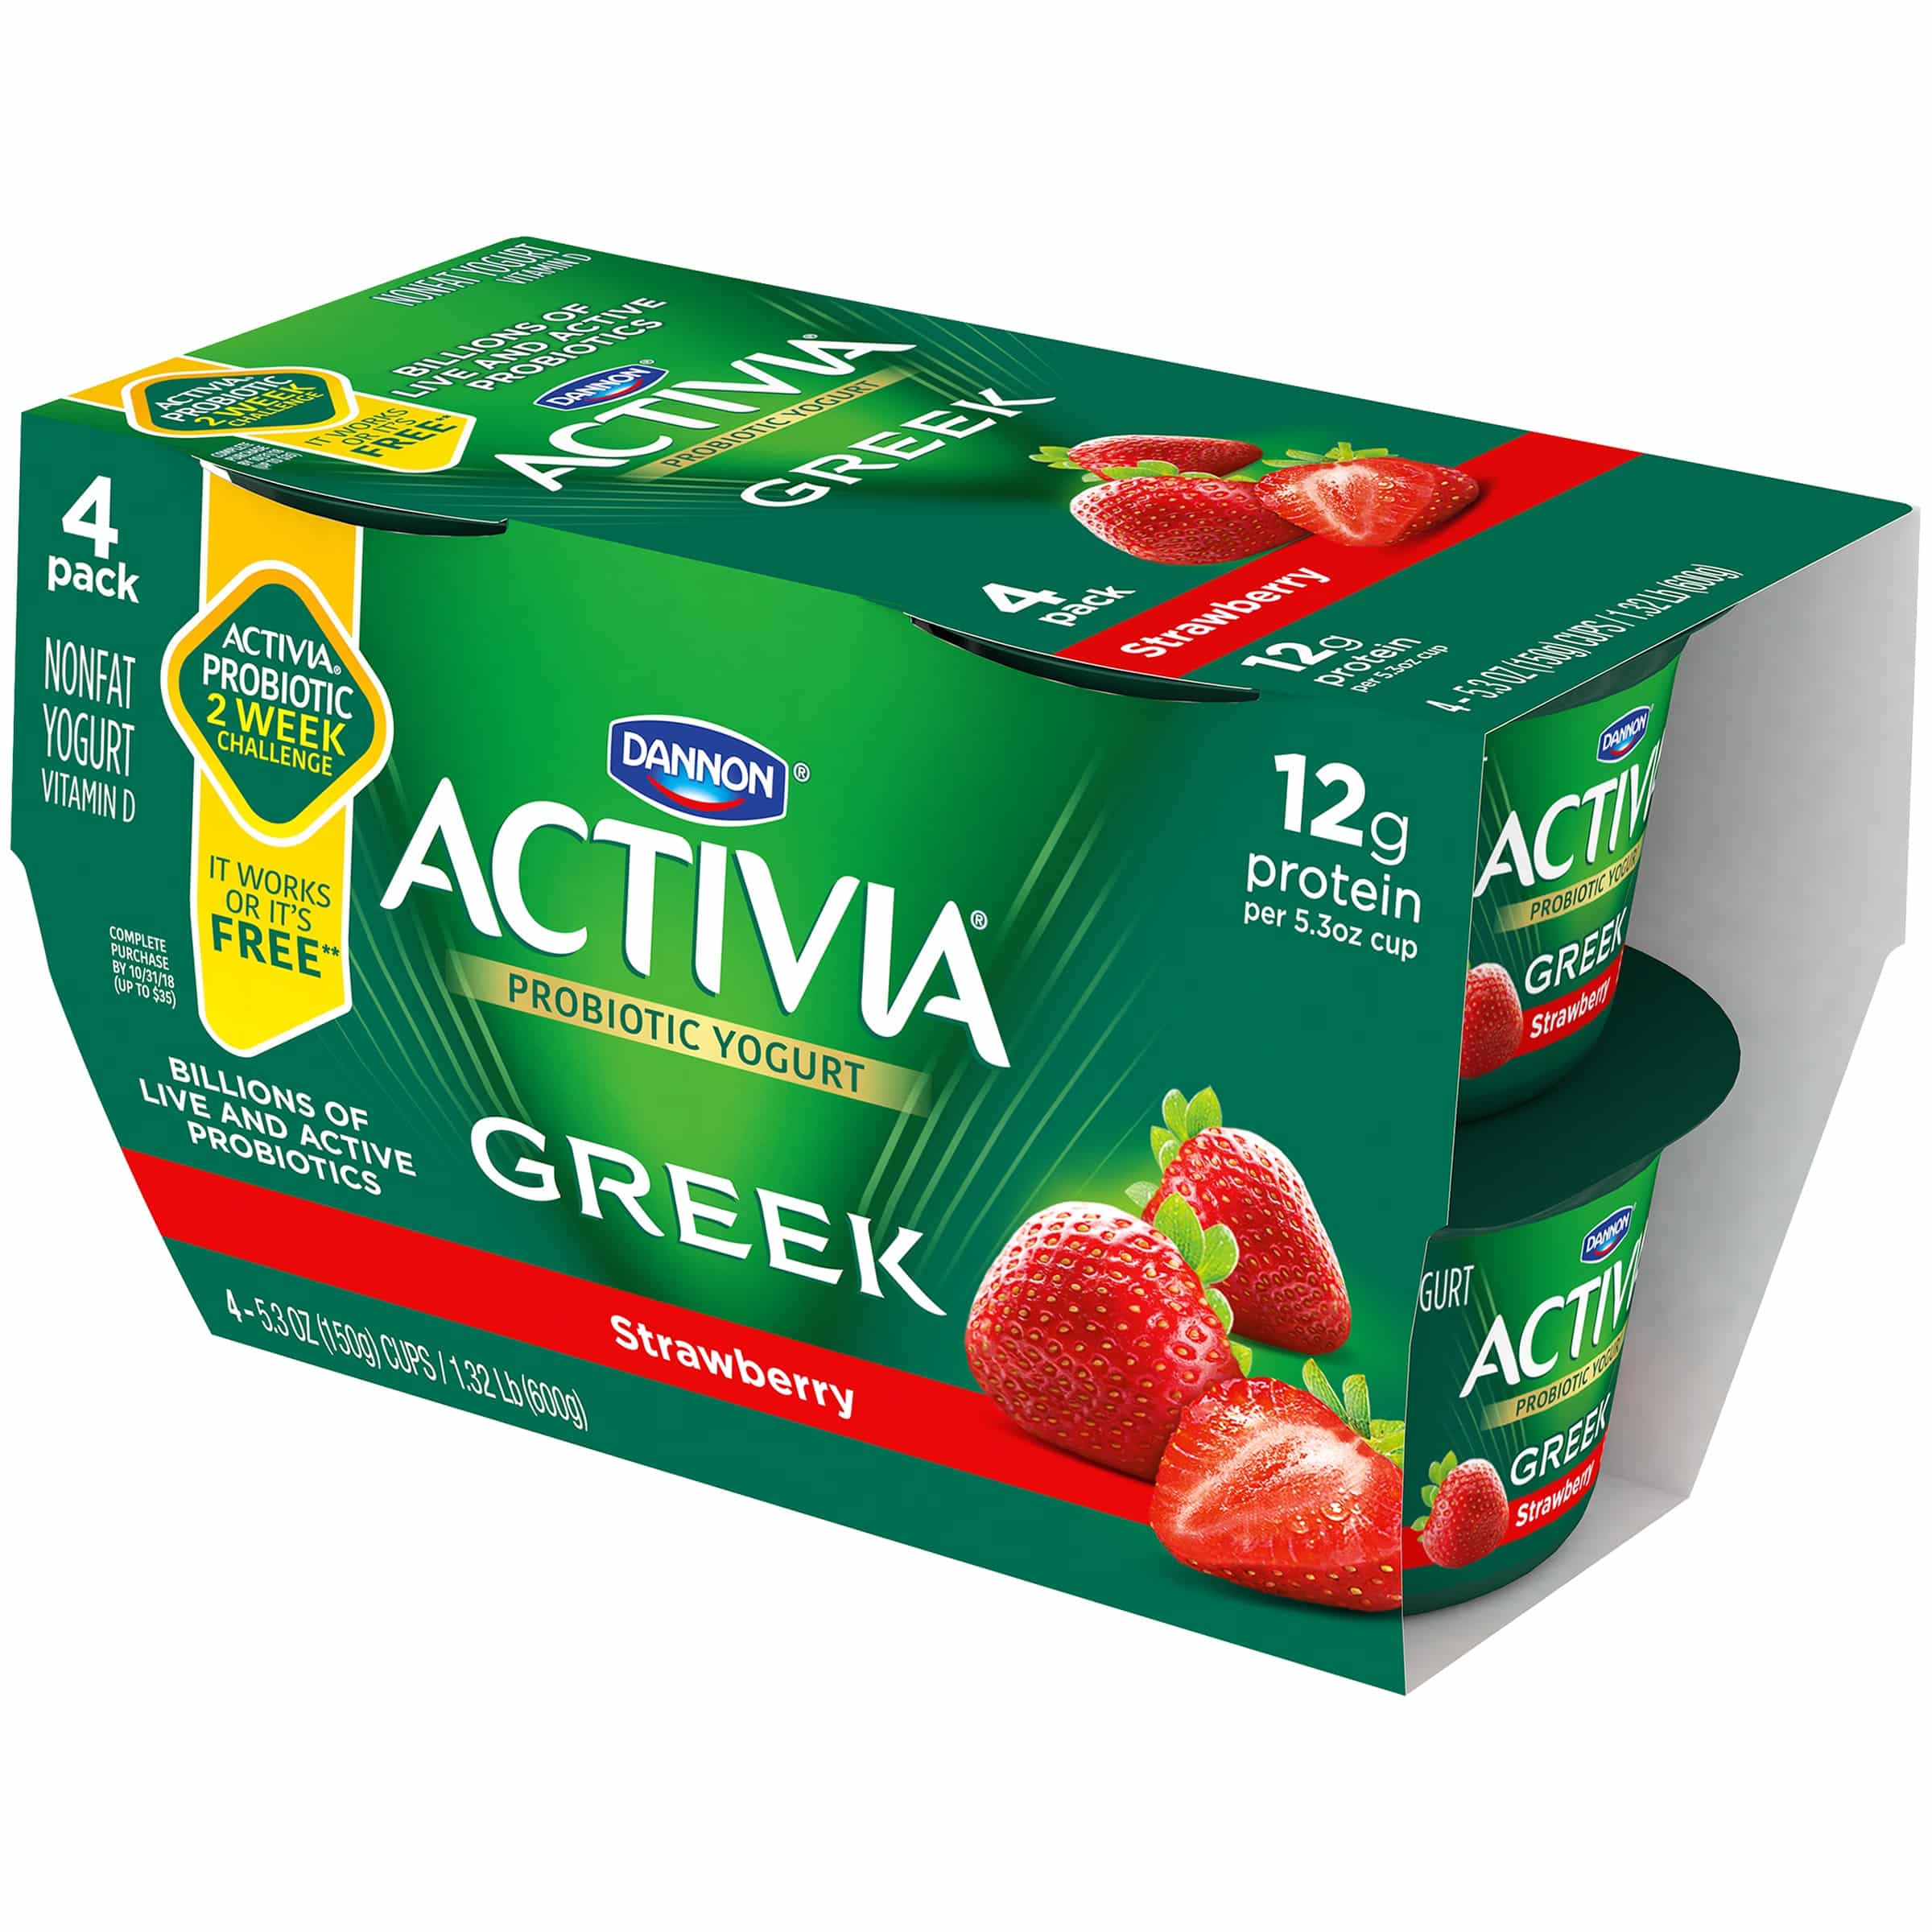 Dannon Activia Yogurt: Does it Work for better digestive system ...